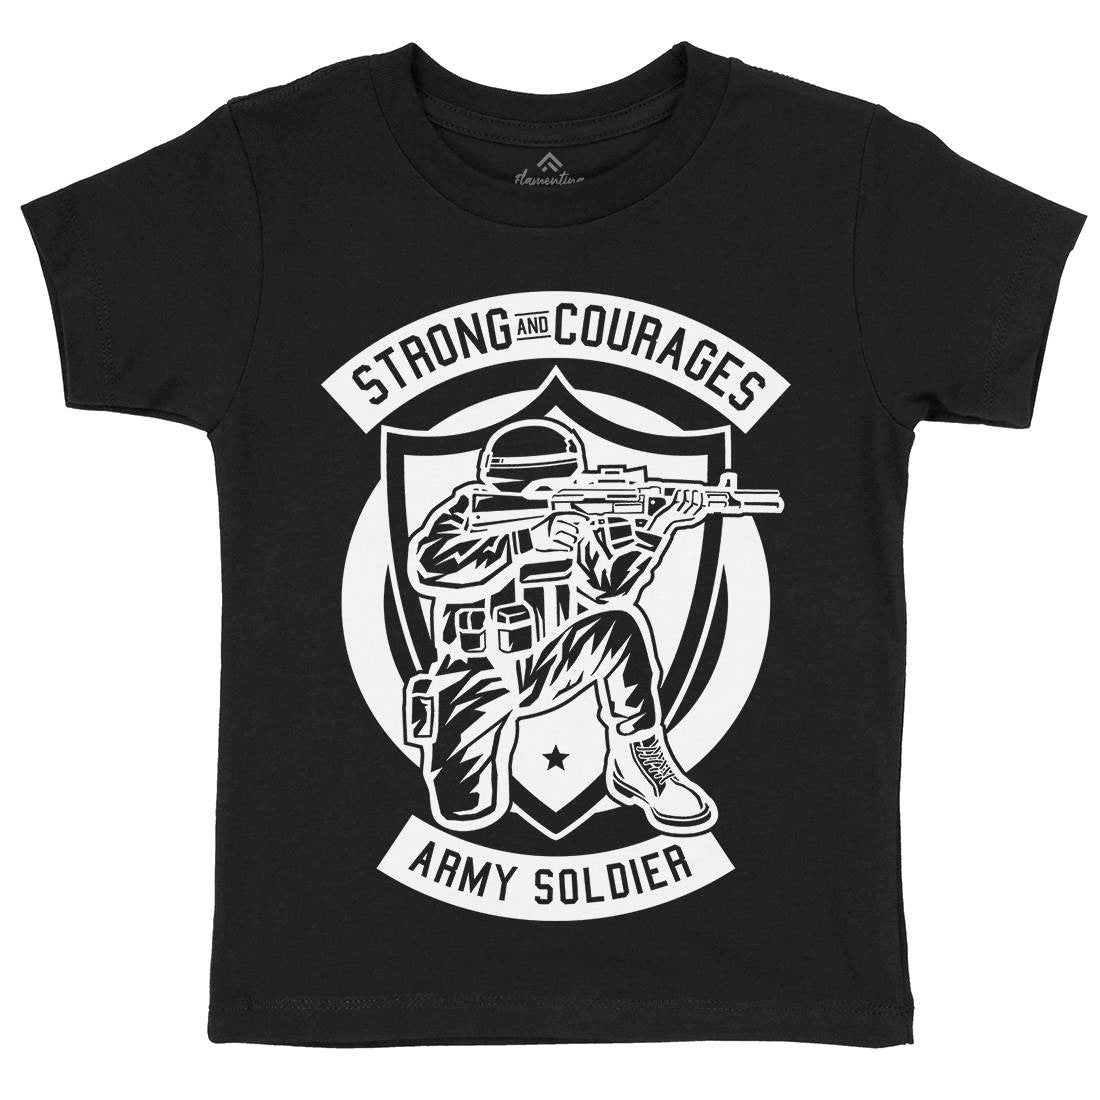 Army Soldier Kids Crew Neck T-Shirt Army B483